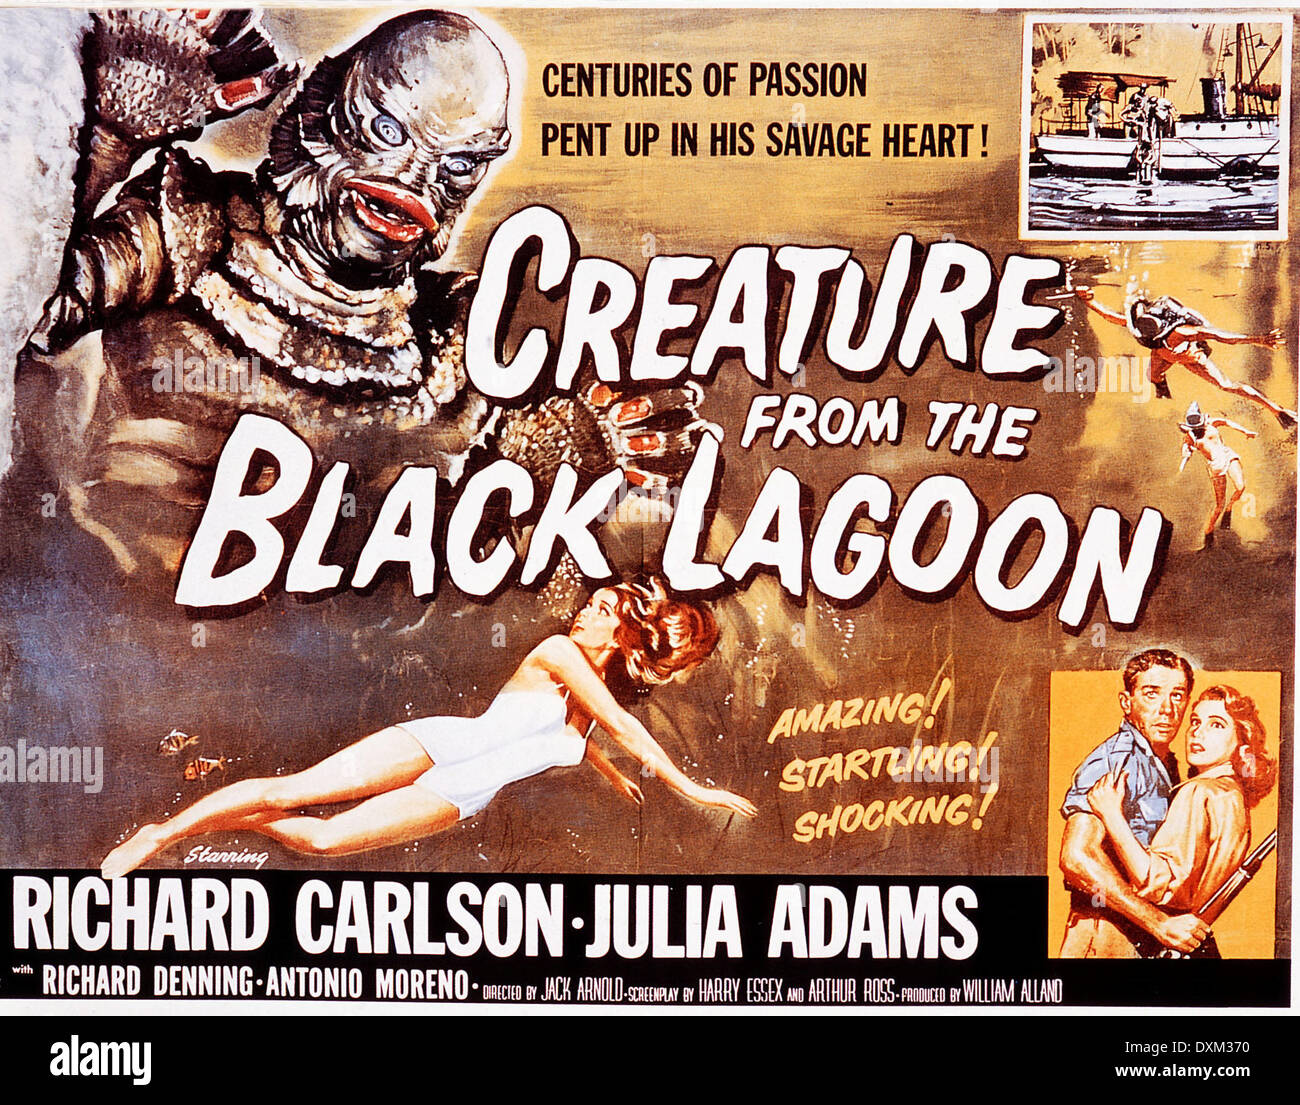 CREATURE FROM THE BLACK LAGOON Stock Photo